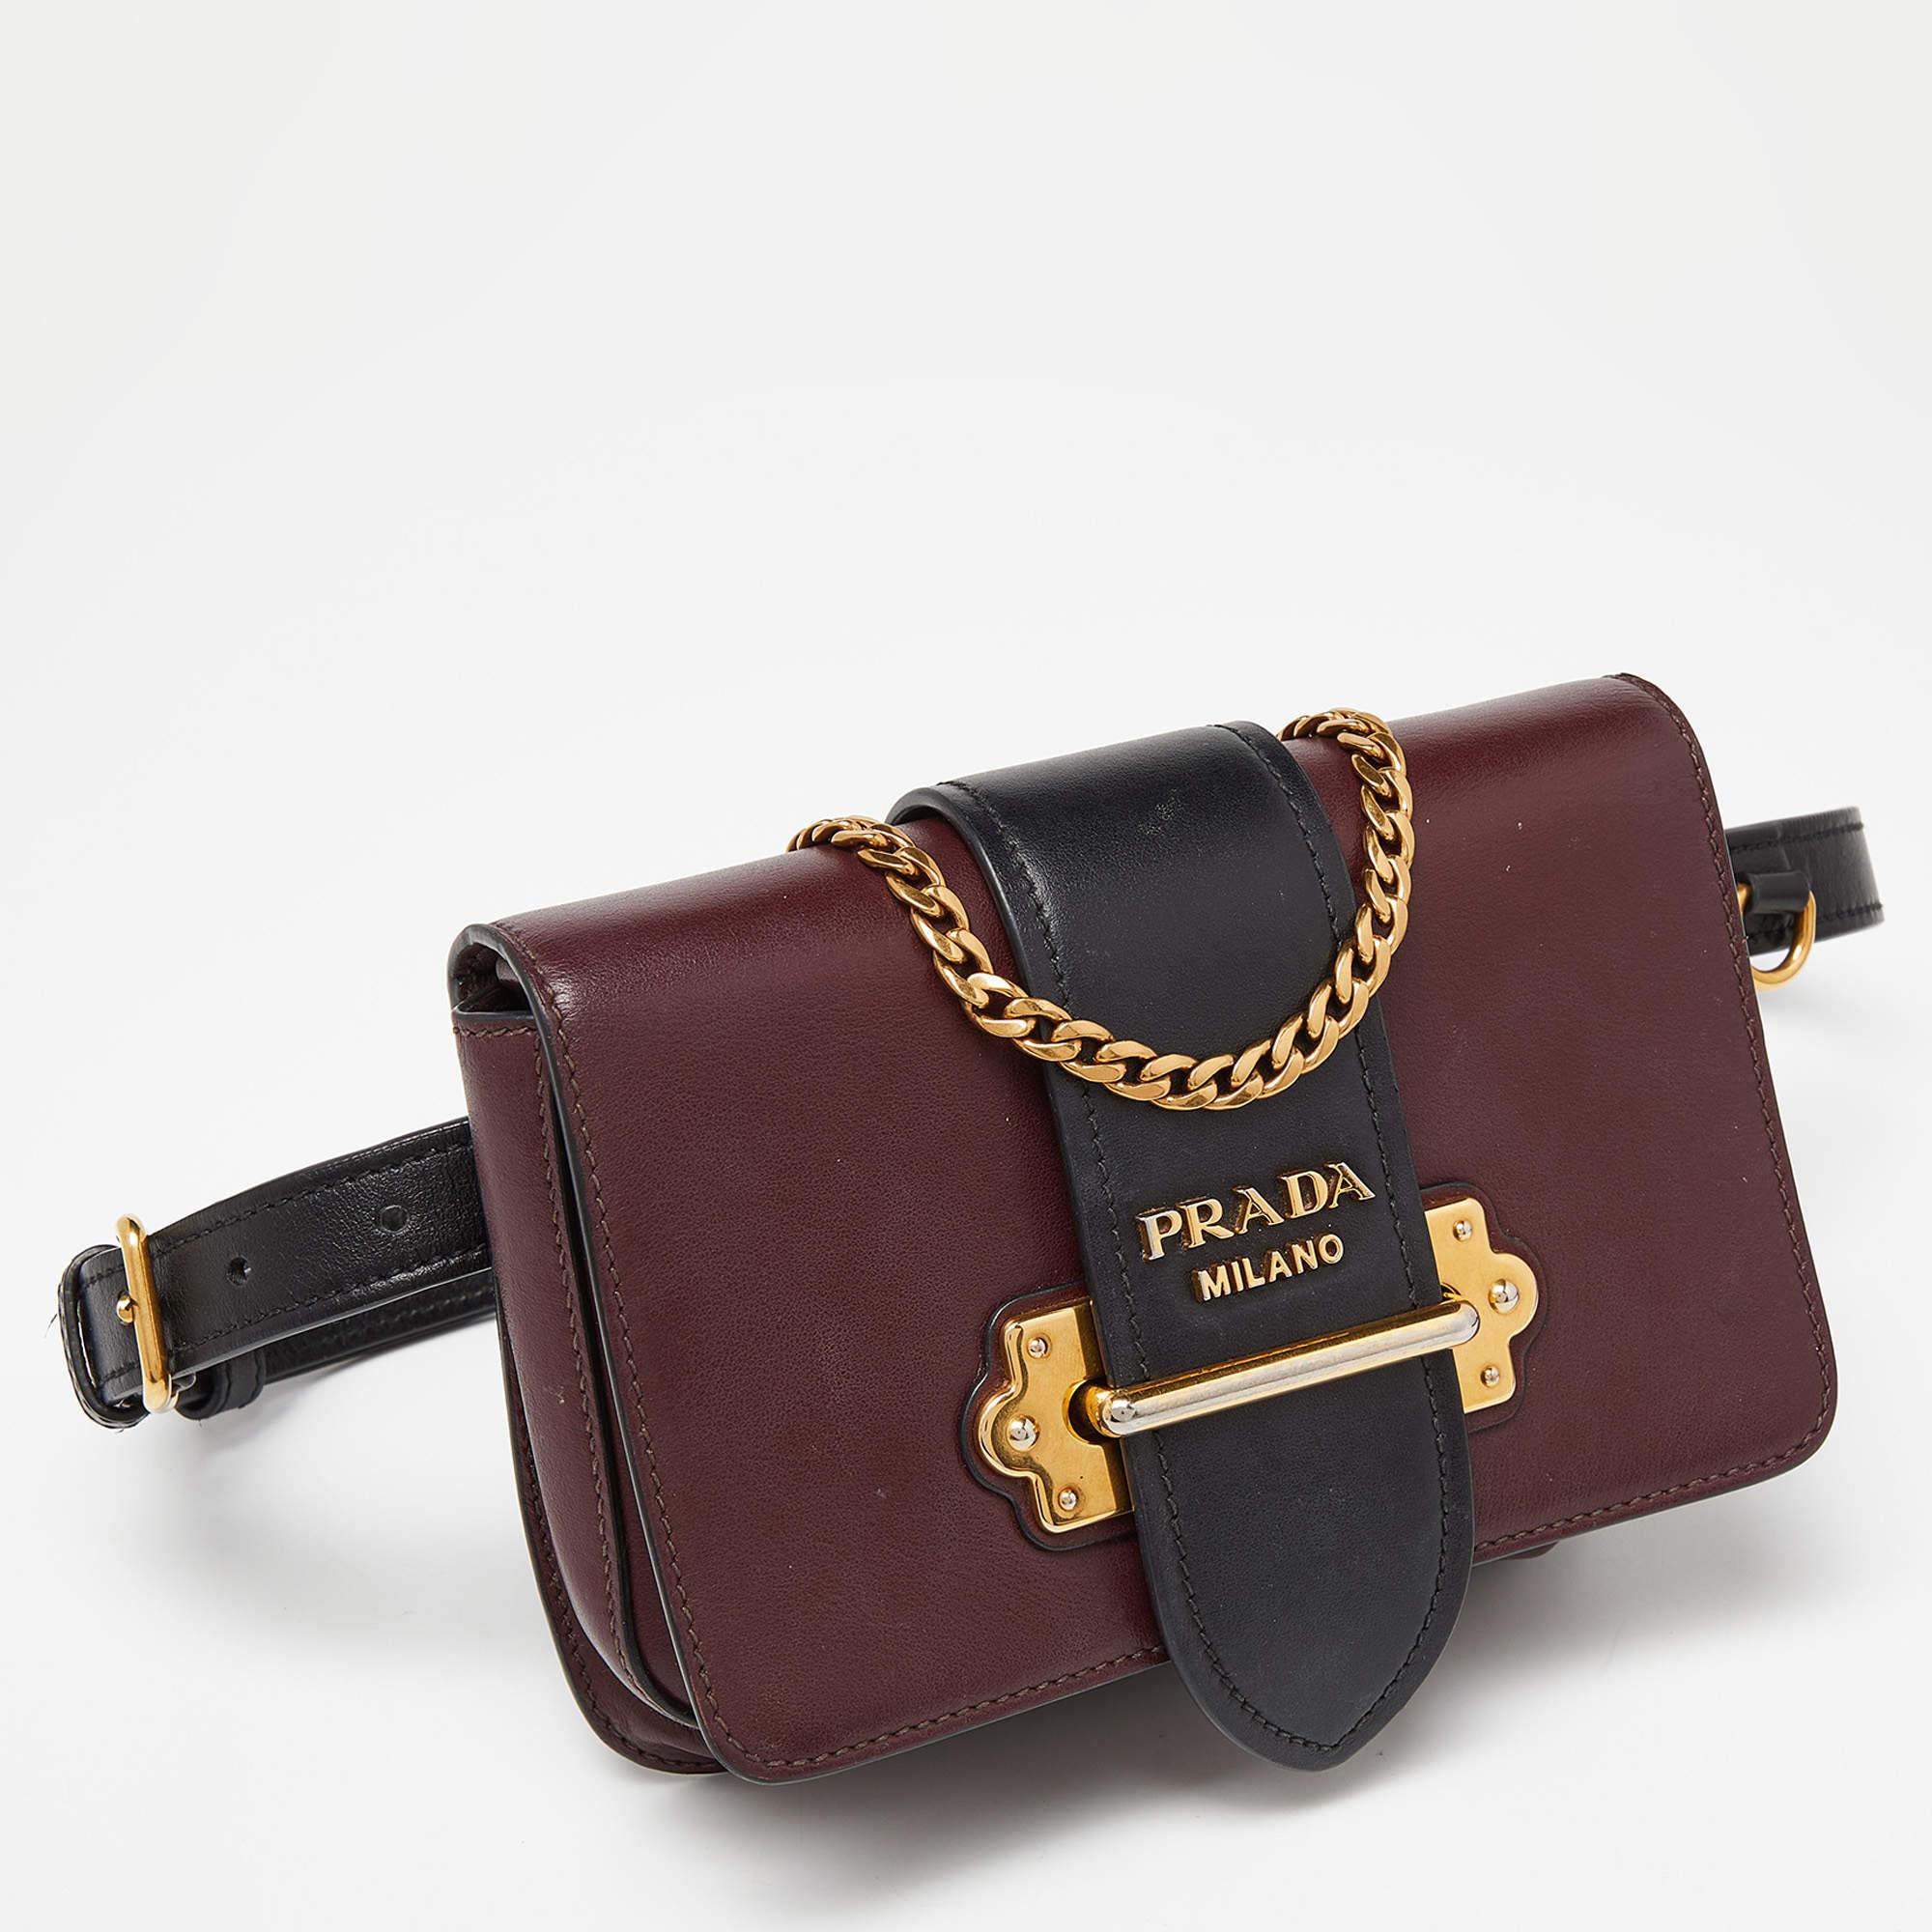 The fashion house’s tradition of excellence, coupled with modern design sensibilities, works to make this Prada bag one of a kind. It's a fabulous accessory for everyday use.

